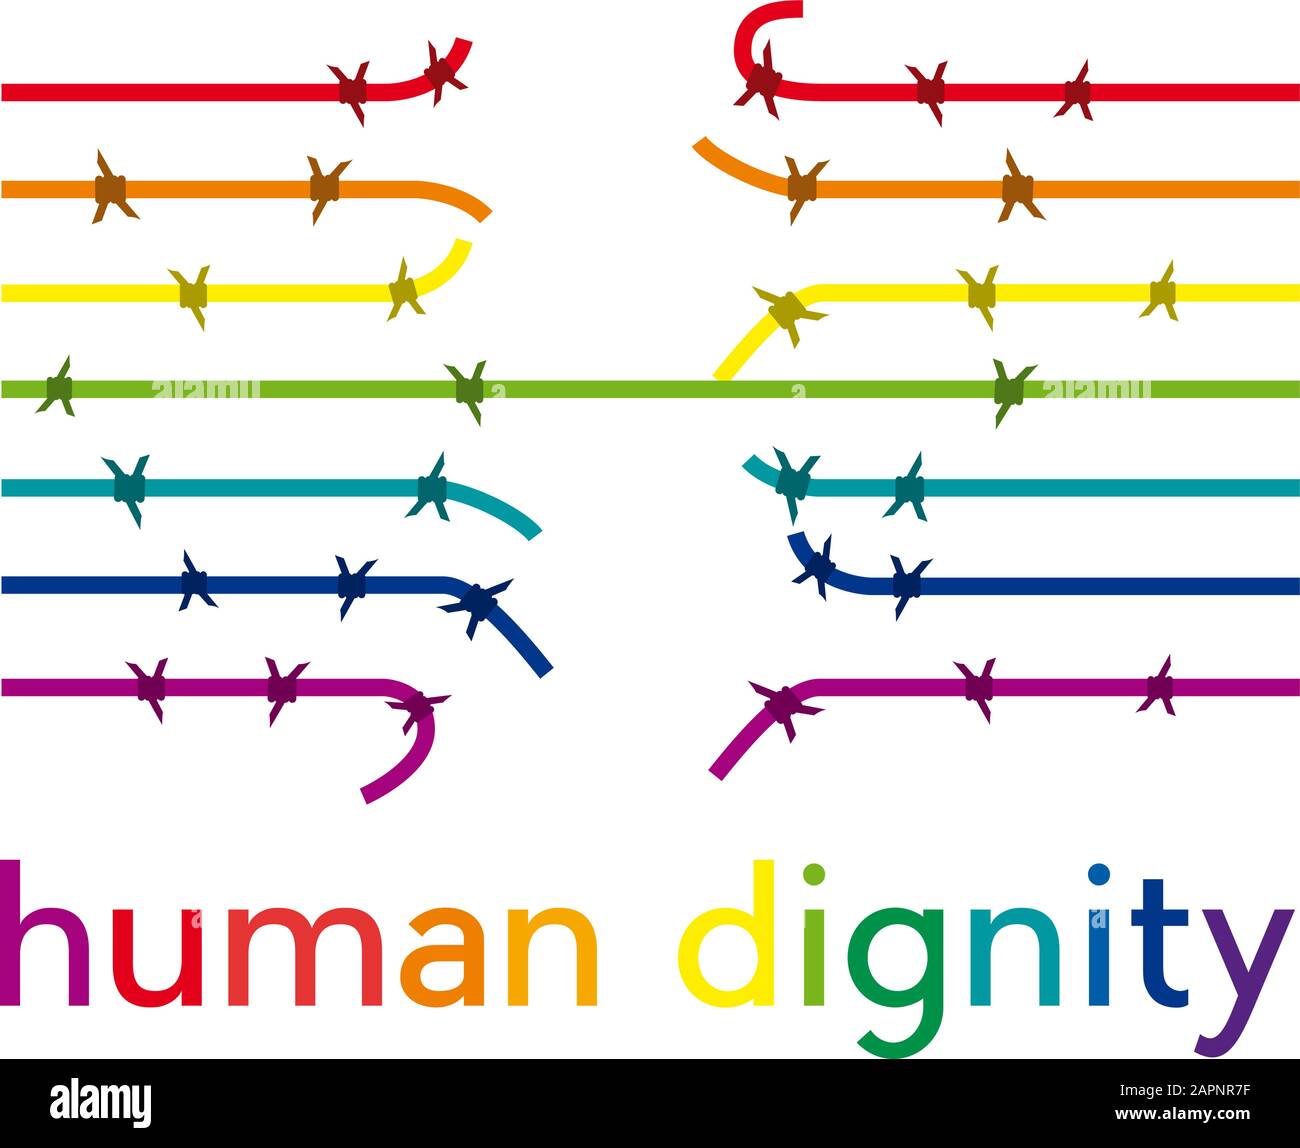 Vector abstract barbed wire, human dignity concept Stock Vector